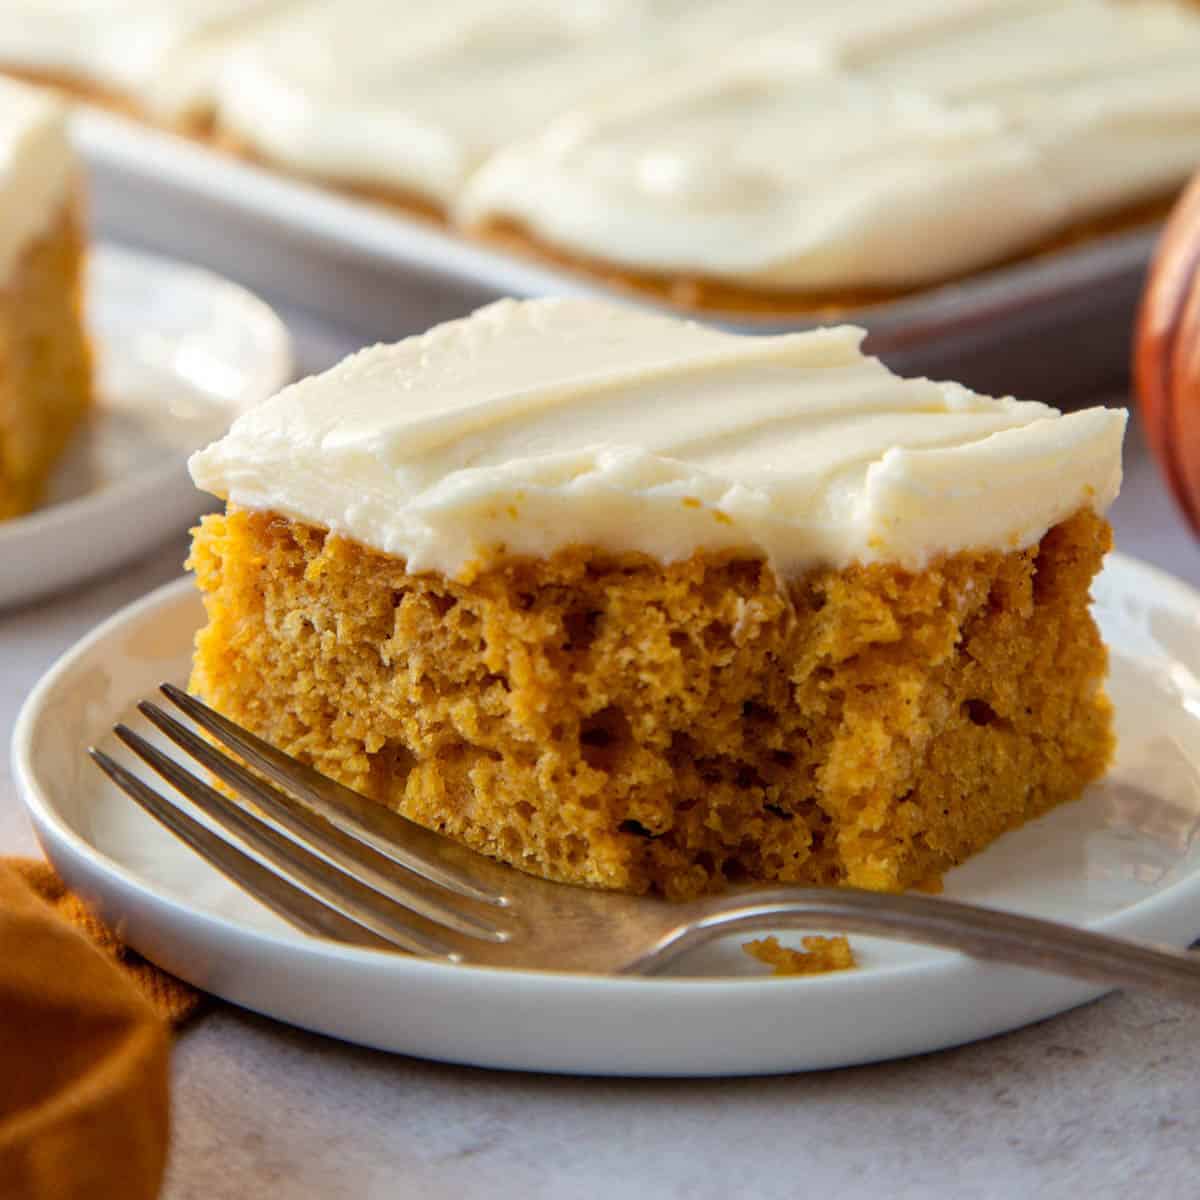 slice of pumpkin bar with cream cheese frosting, with a bite taken out.